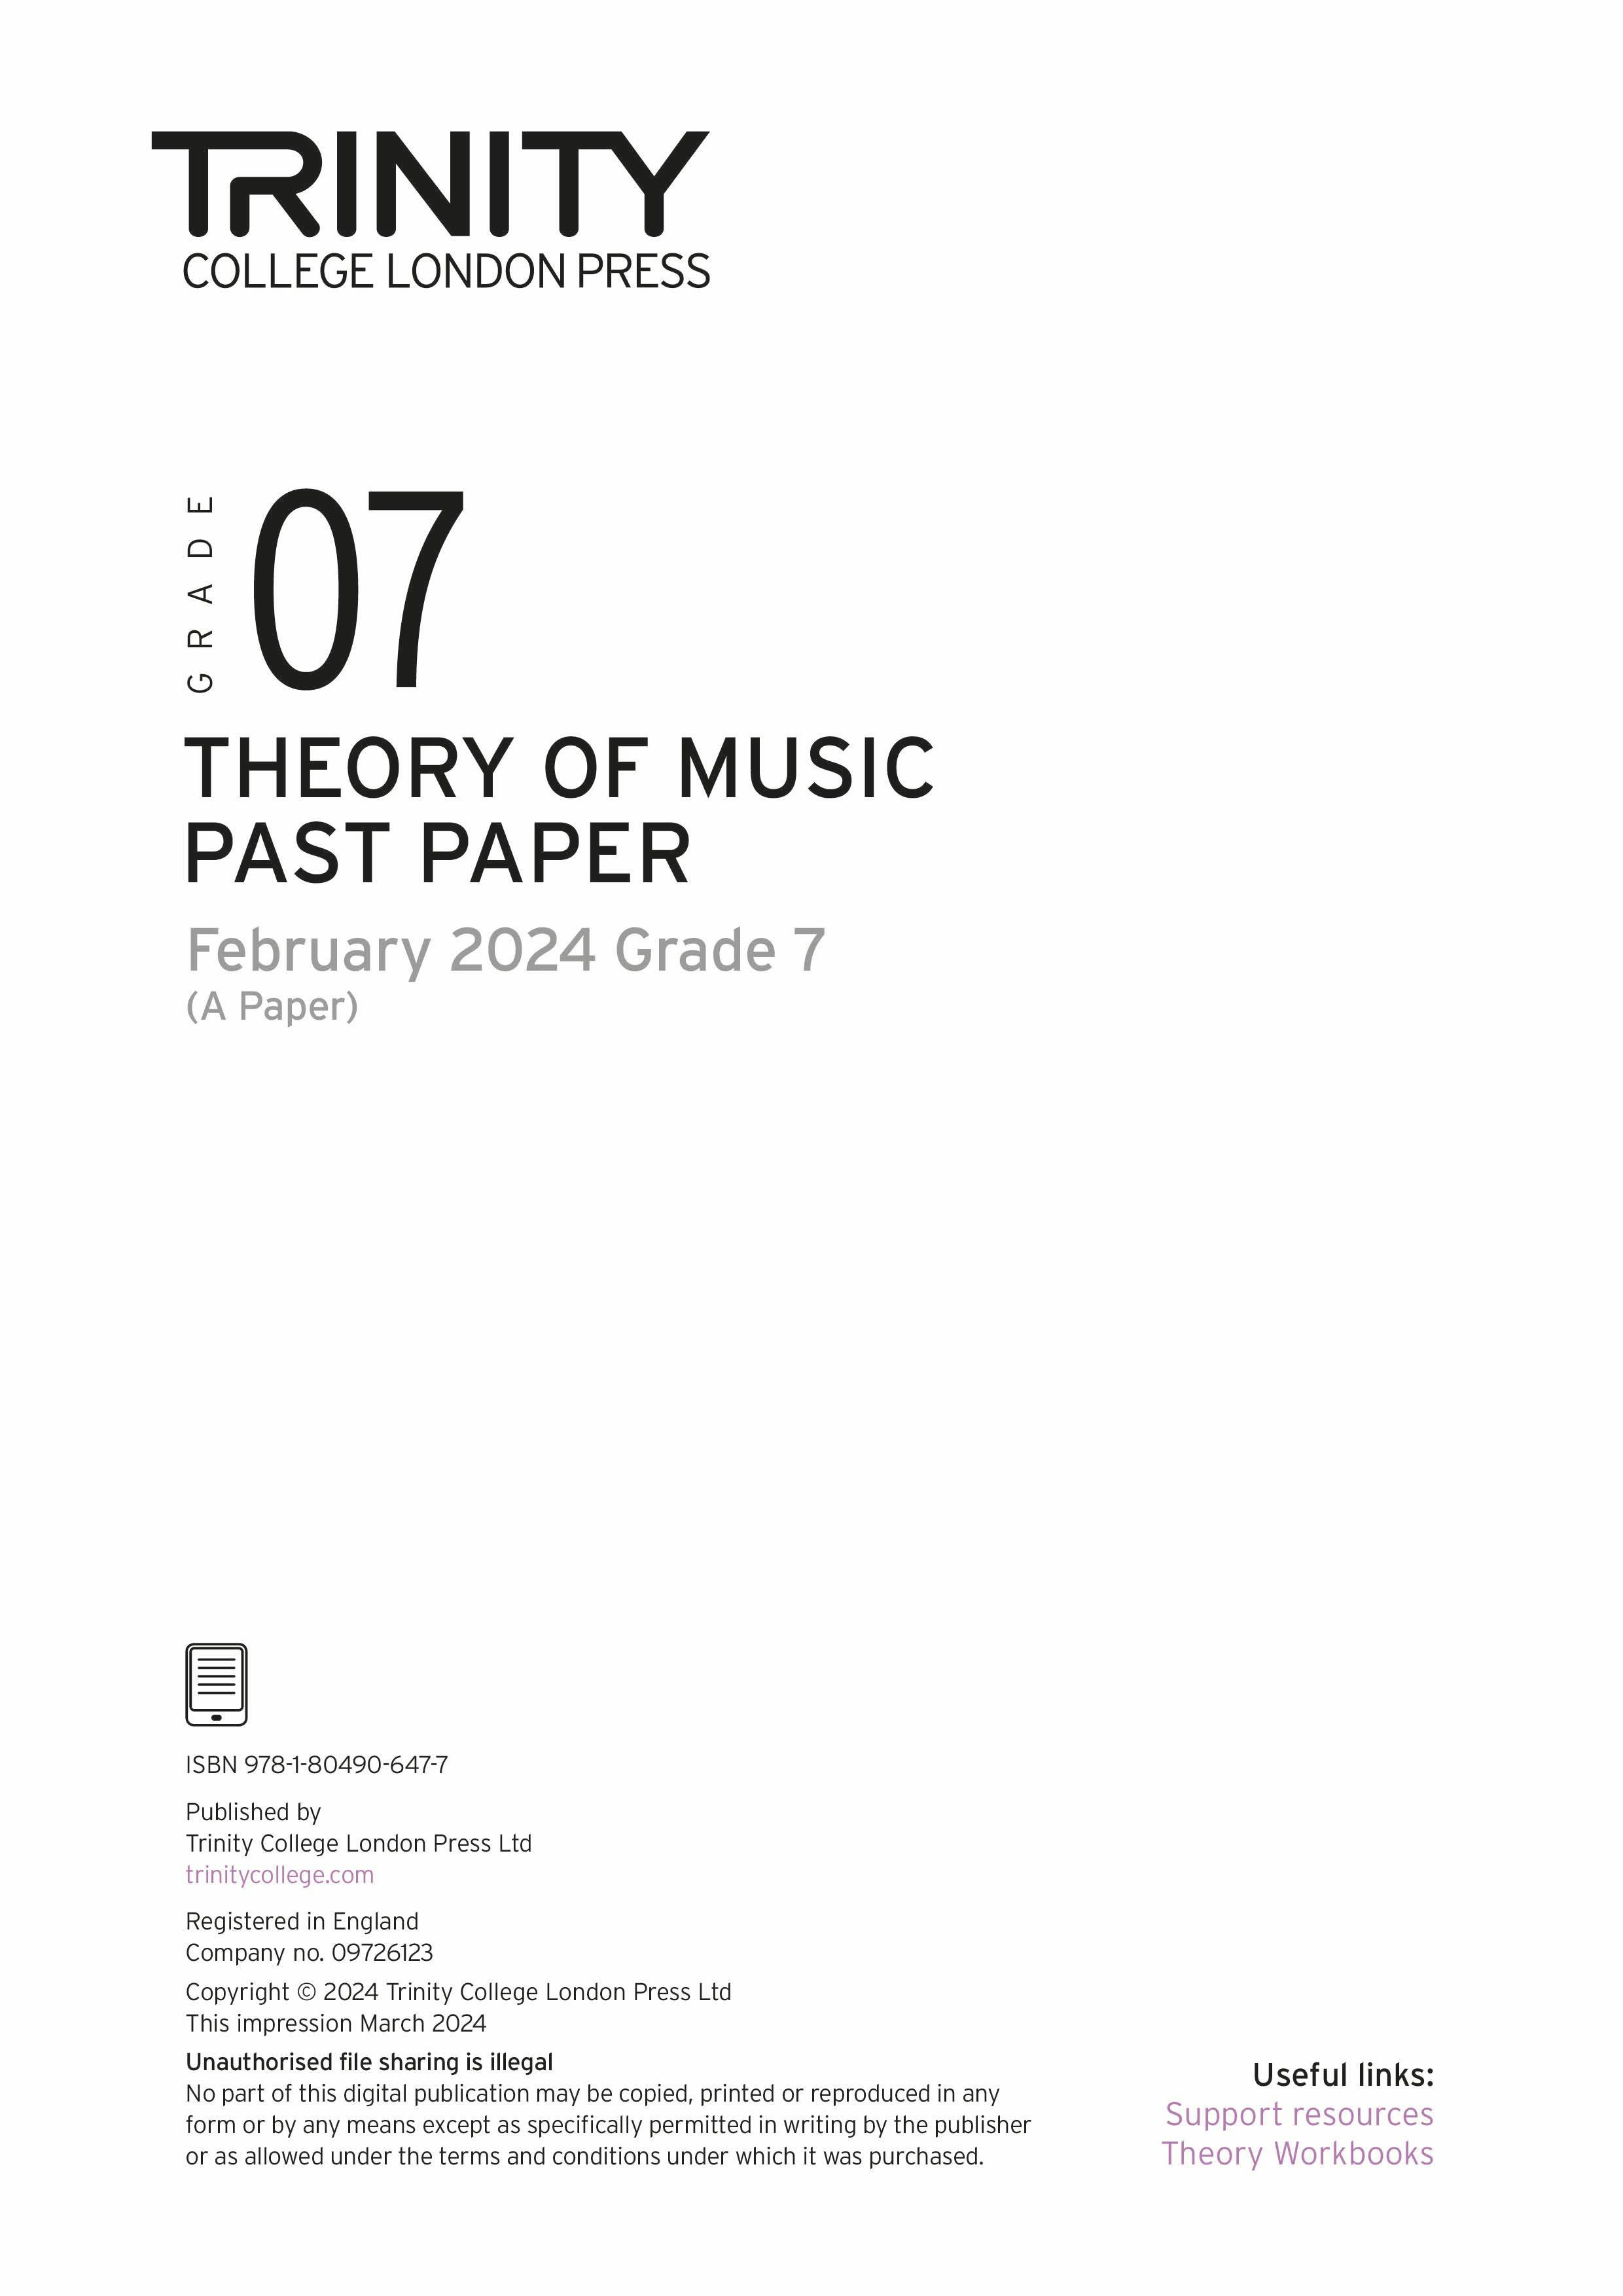 Theory of Music Past Paper 2024 February A: Grade 7 - ebook